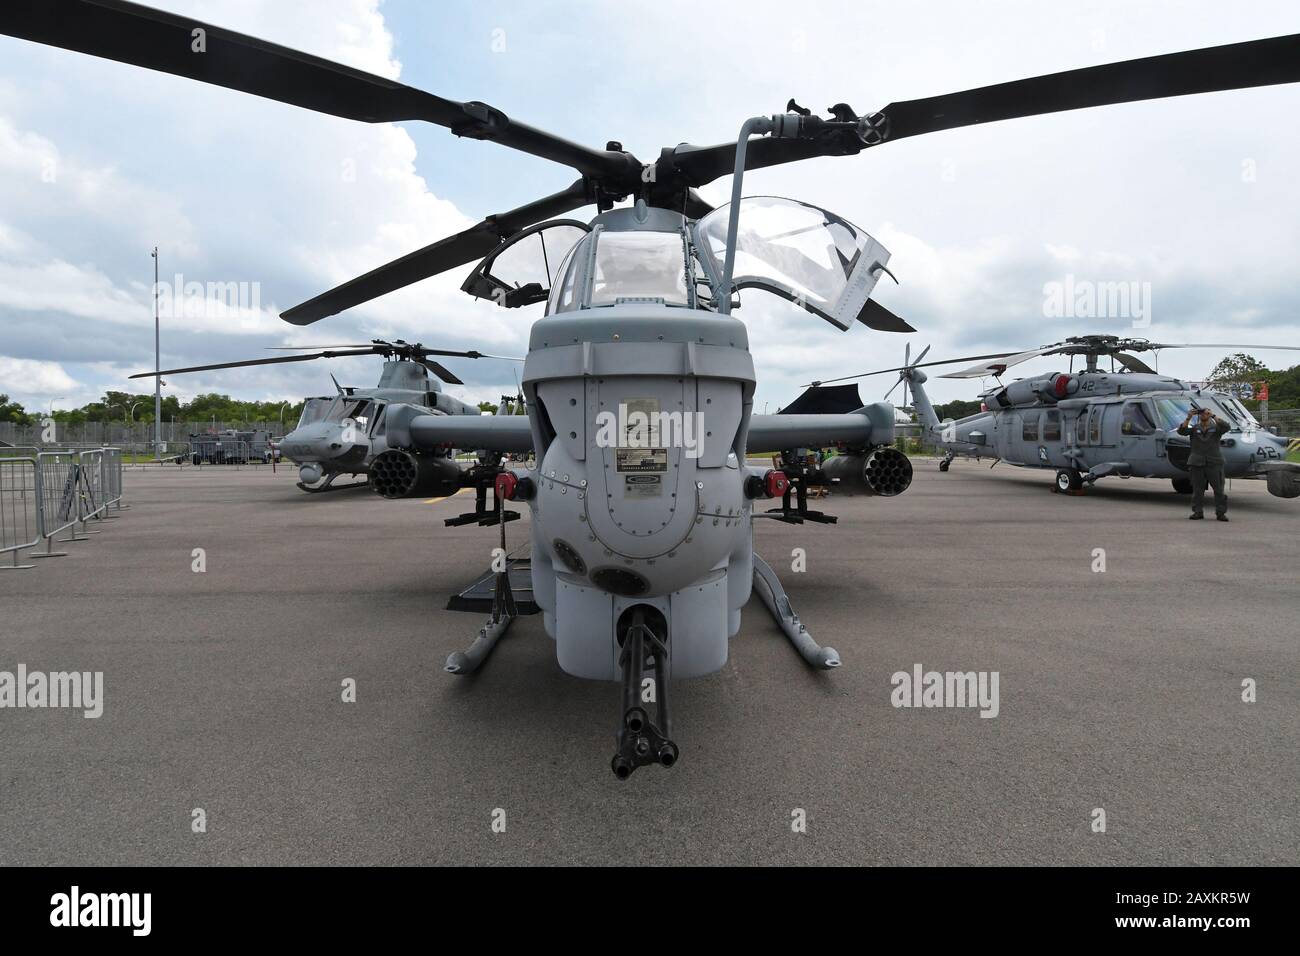 Singapore. 12th Feb, 2020. A U.S. Marines' attack helicopter is on display at the Singapore Airshow held at Changi Exhibition Centre in Singapore, Feb. 12, 2020. Singapore Airshow 2020, Asia's largest aerospace and defense exhibition, kicked off here Tuesday at the Changi Exhibition Centre. Credit: Then Chih Wey/Xinhua/Alamy Live News Stock Photo